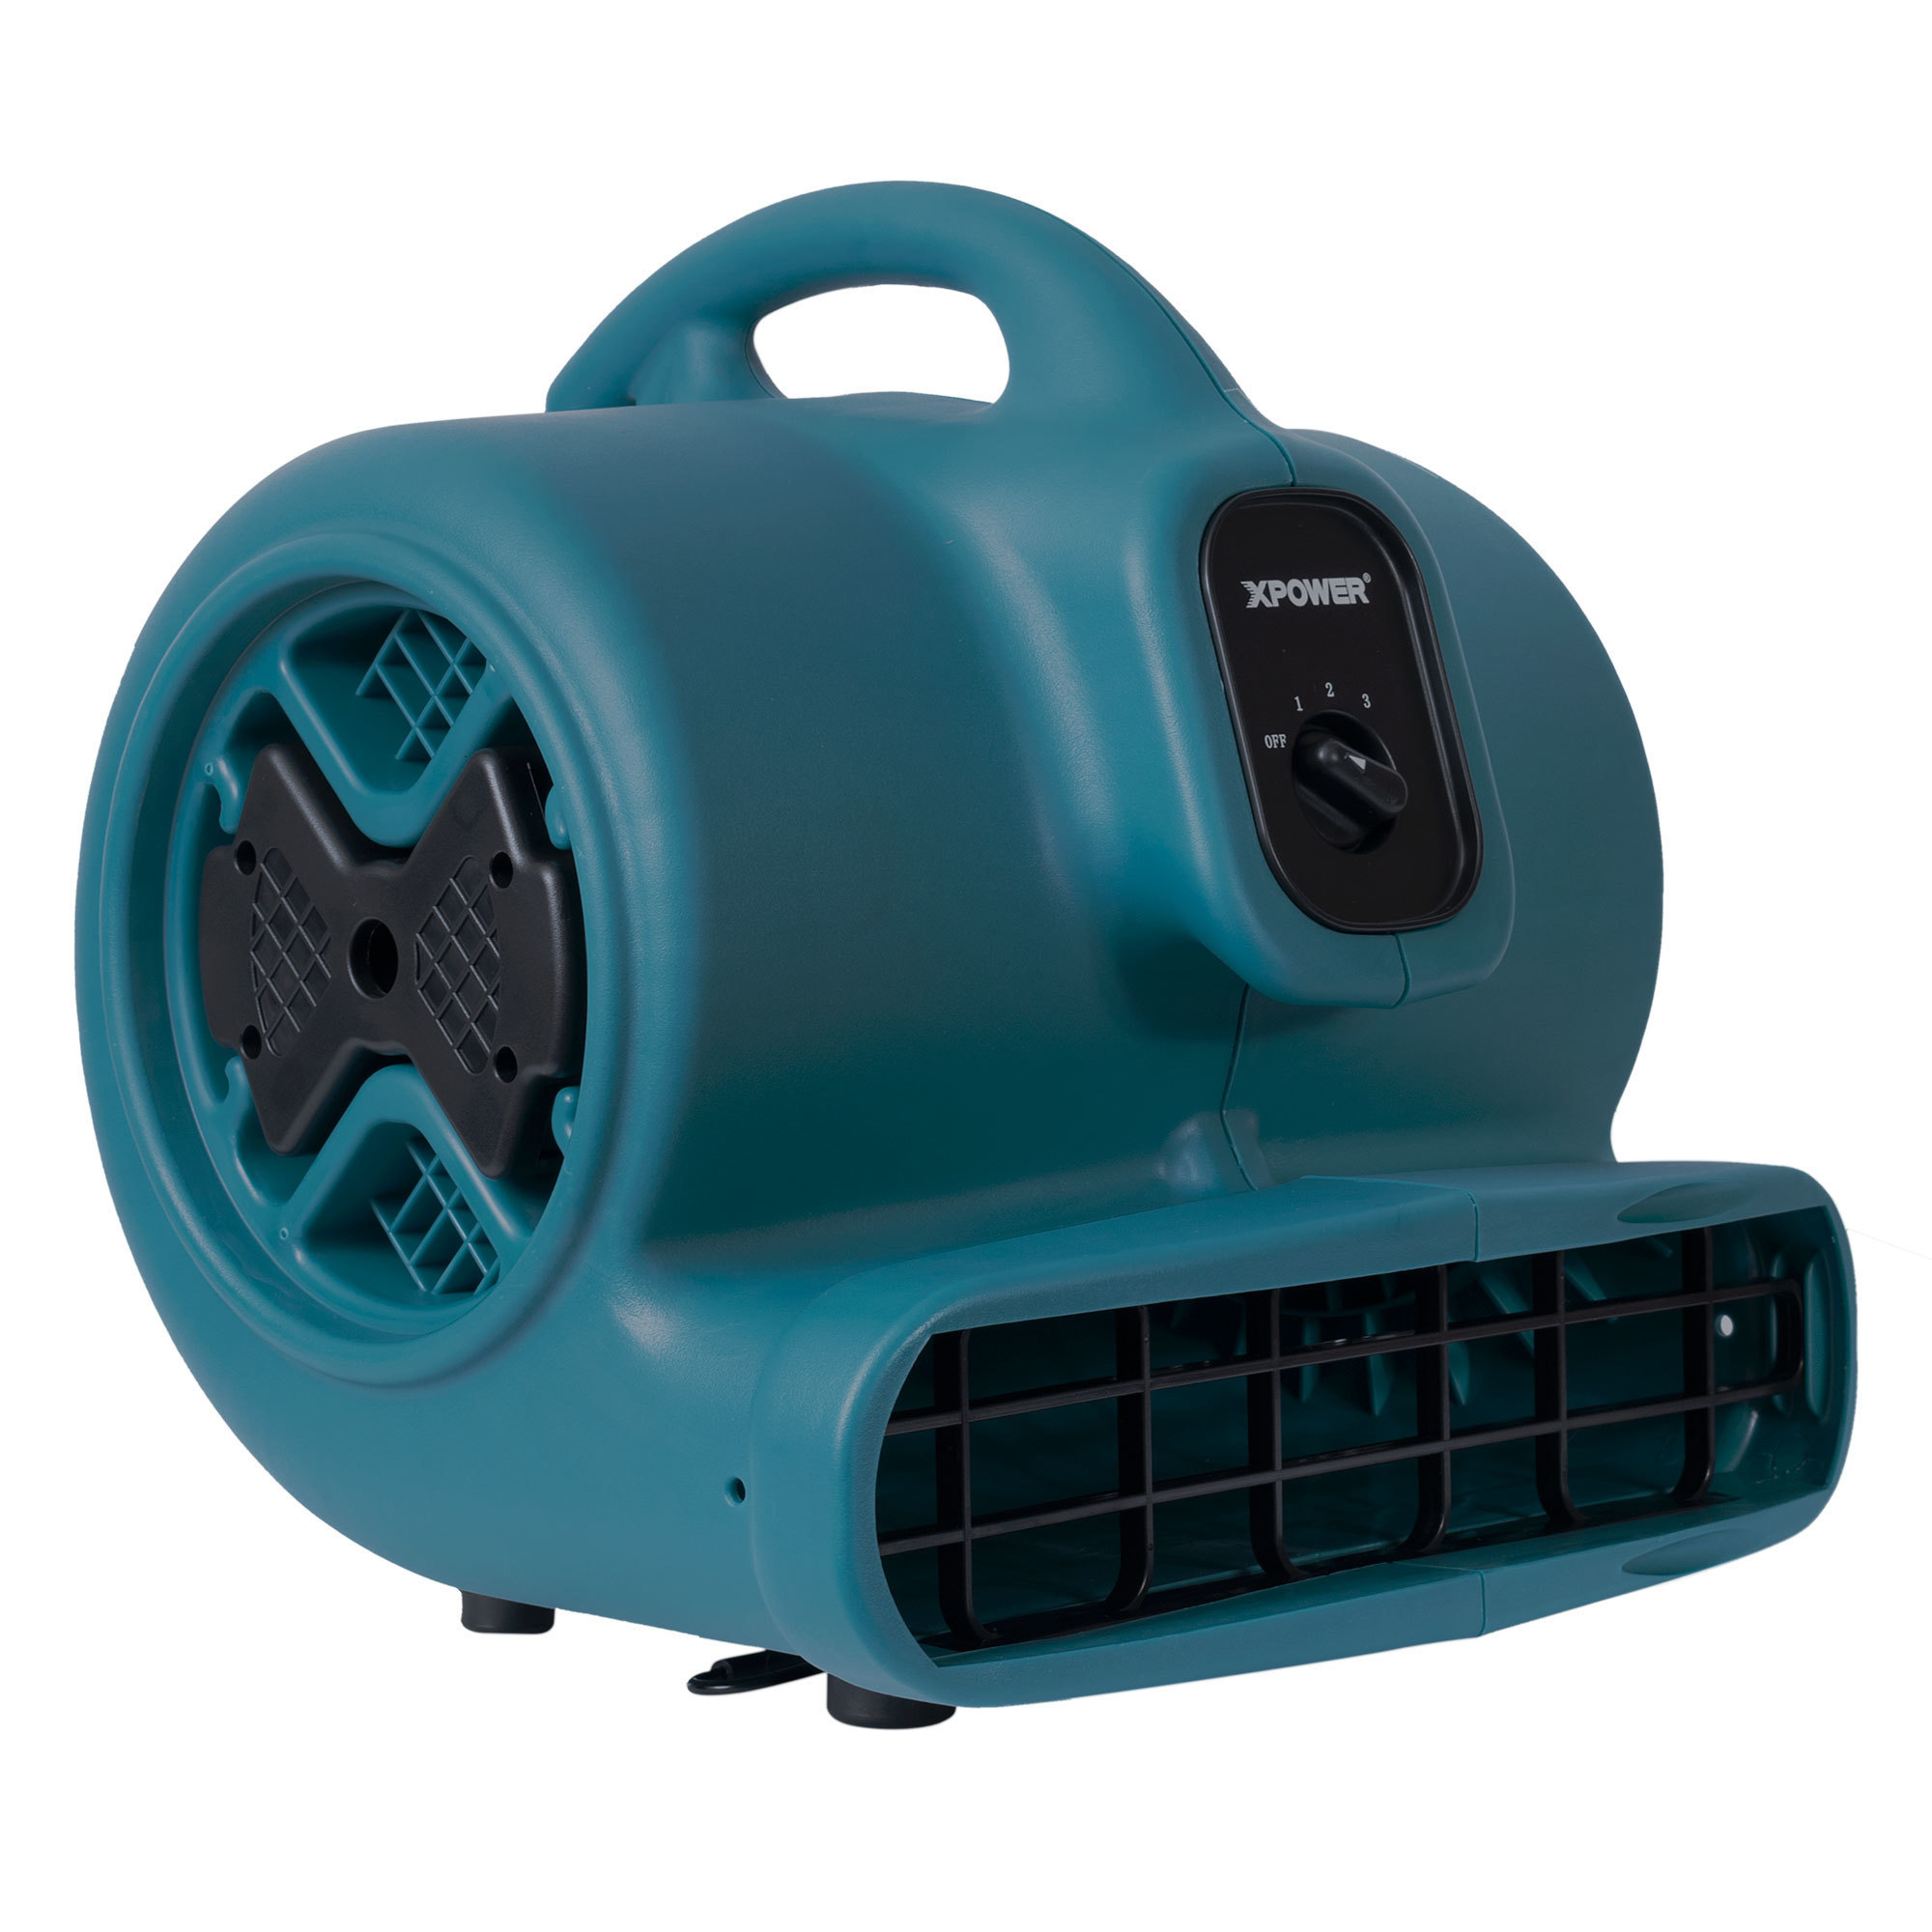 XPOWER, 1/2 HP 3 Speed Air Mover, Fan Type Carpet Blowers, Fan Diameter 8.25 in, Air Delivery 2980 cfm, Model P-630-Blue